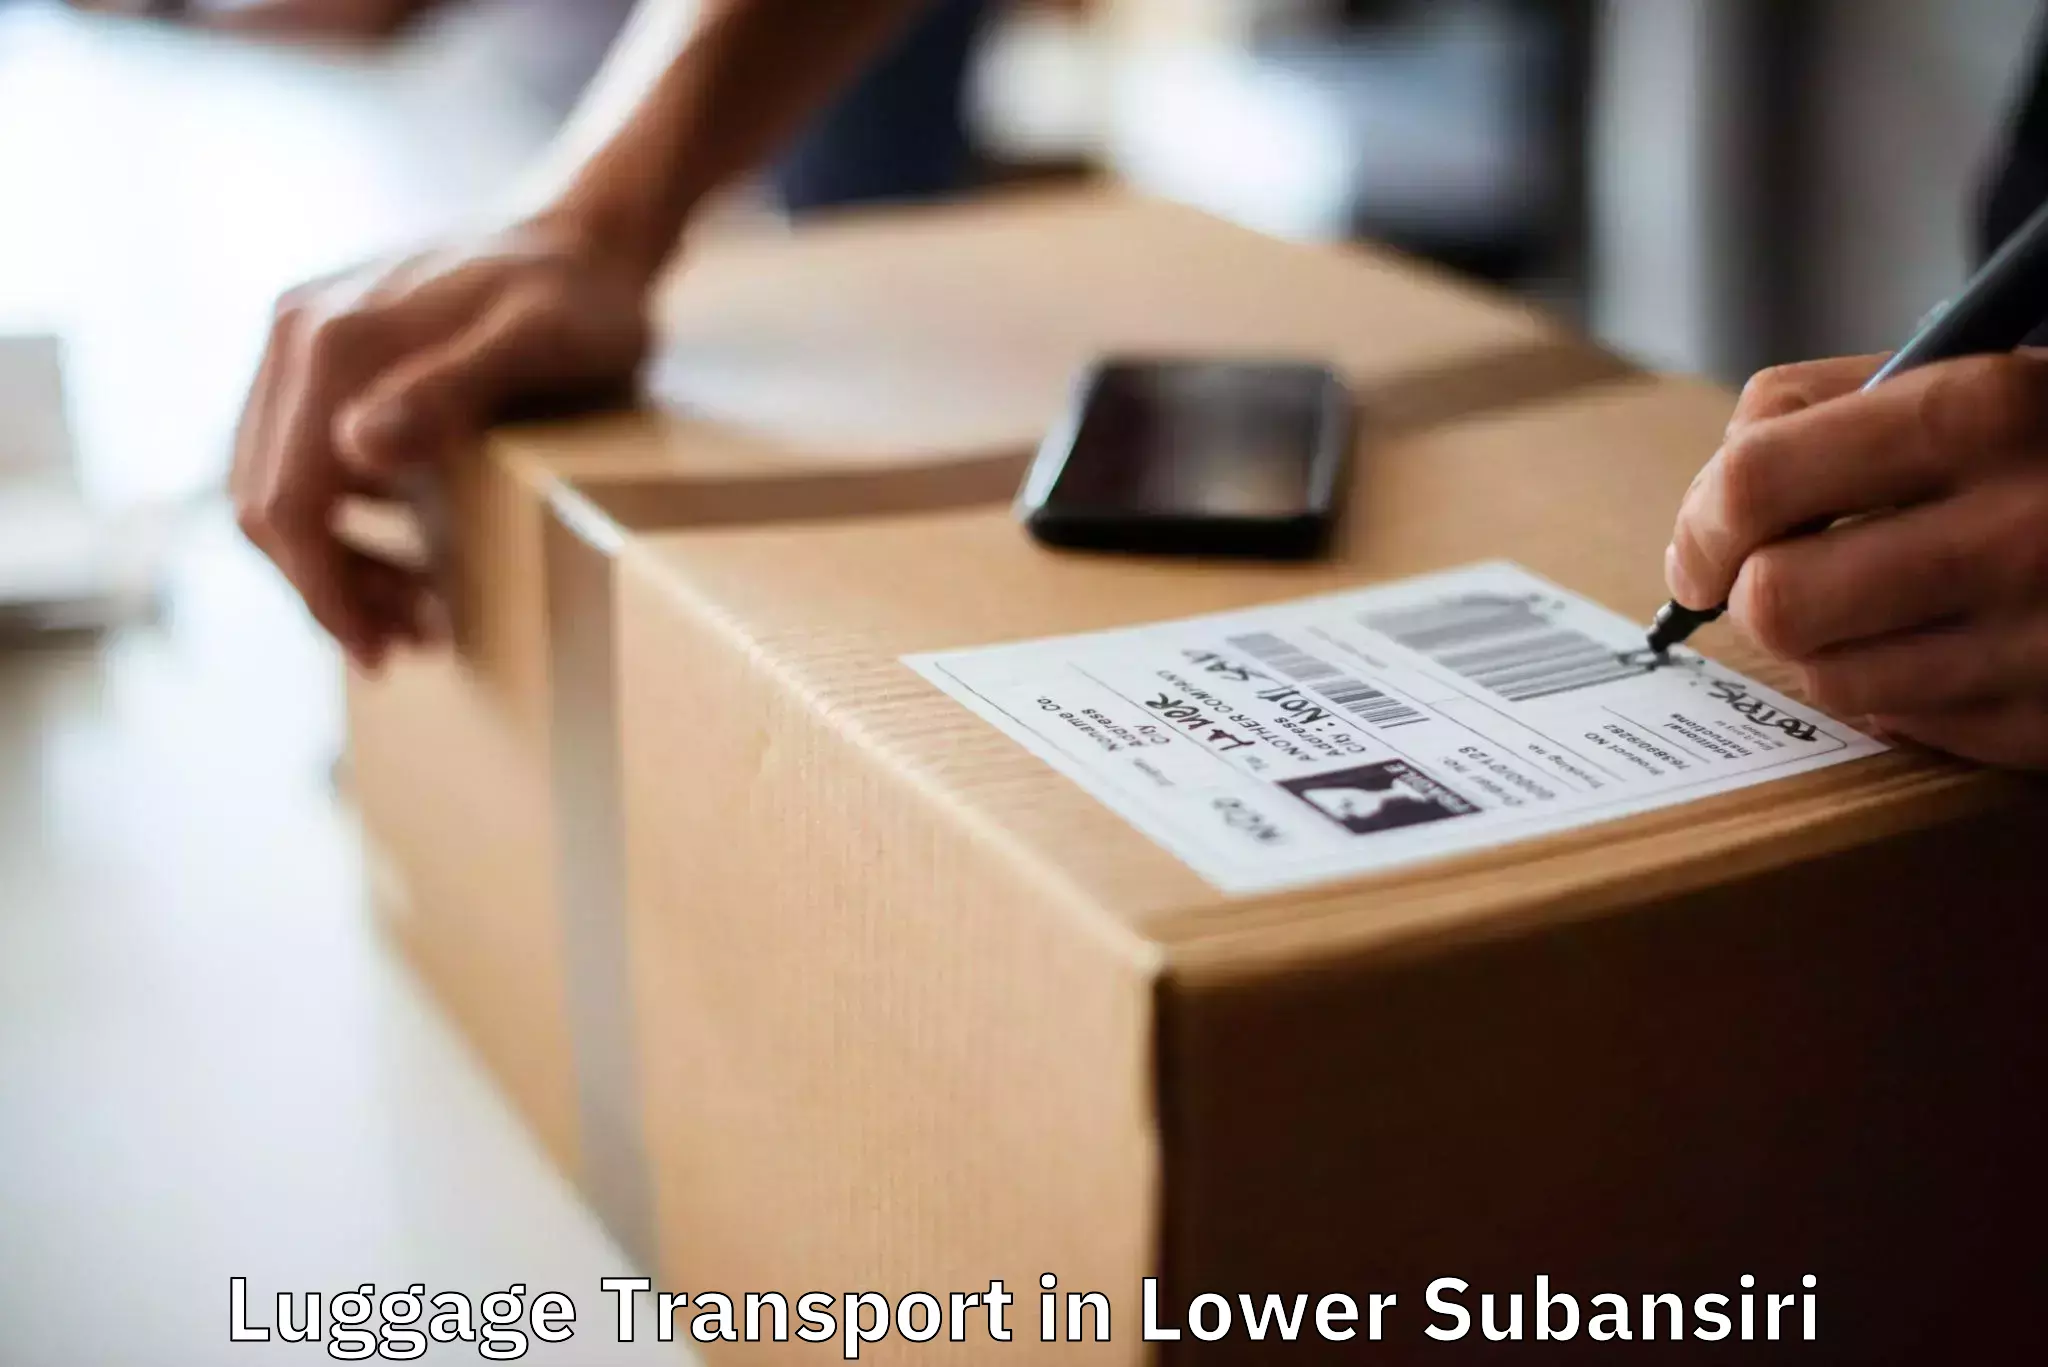 Personal effects shipping in Lower Subansiri